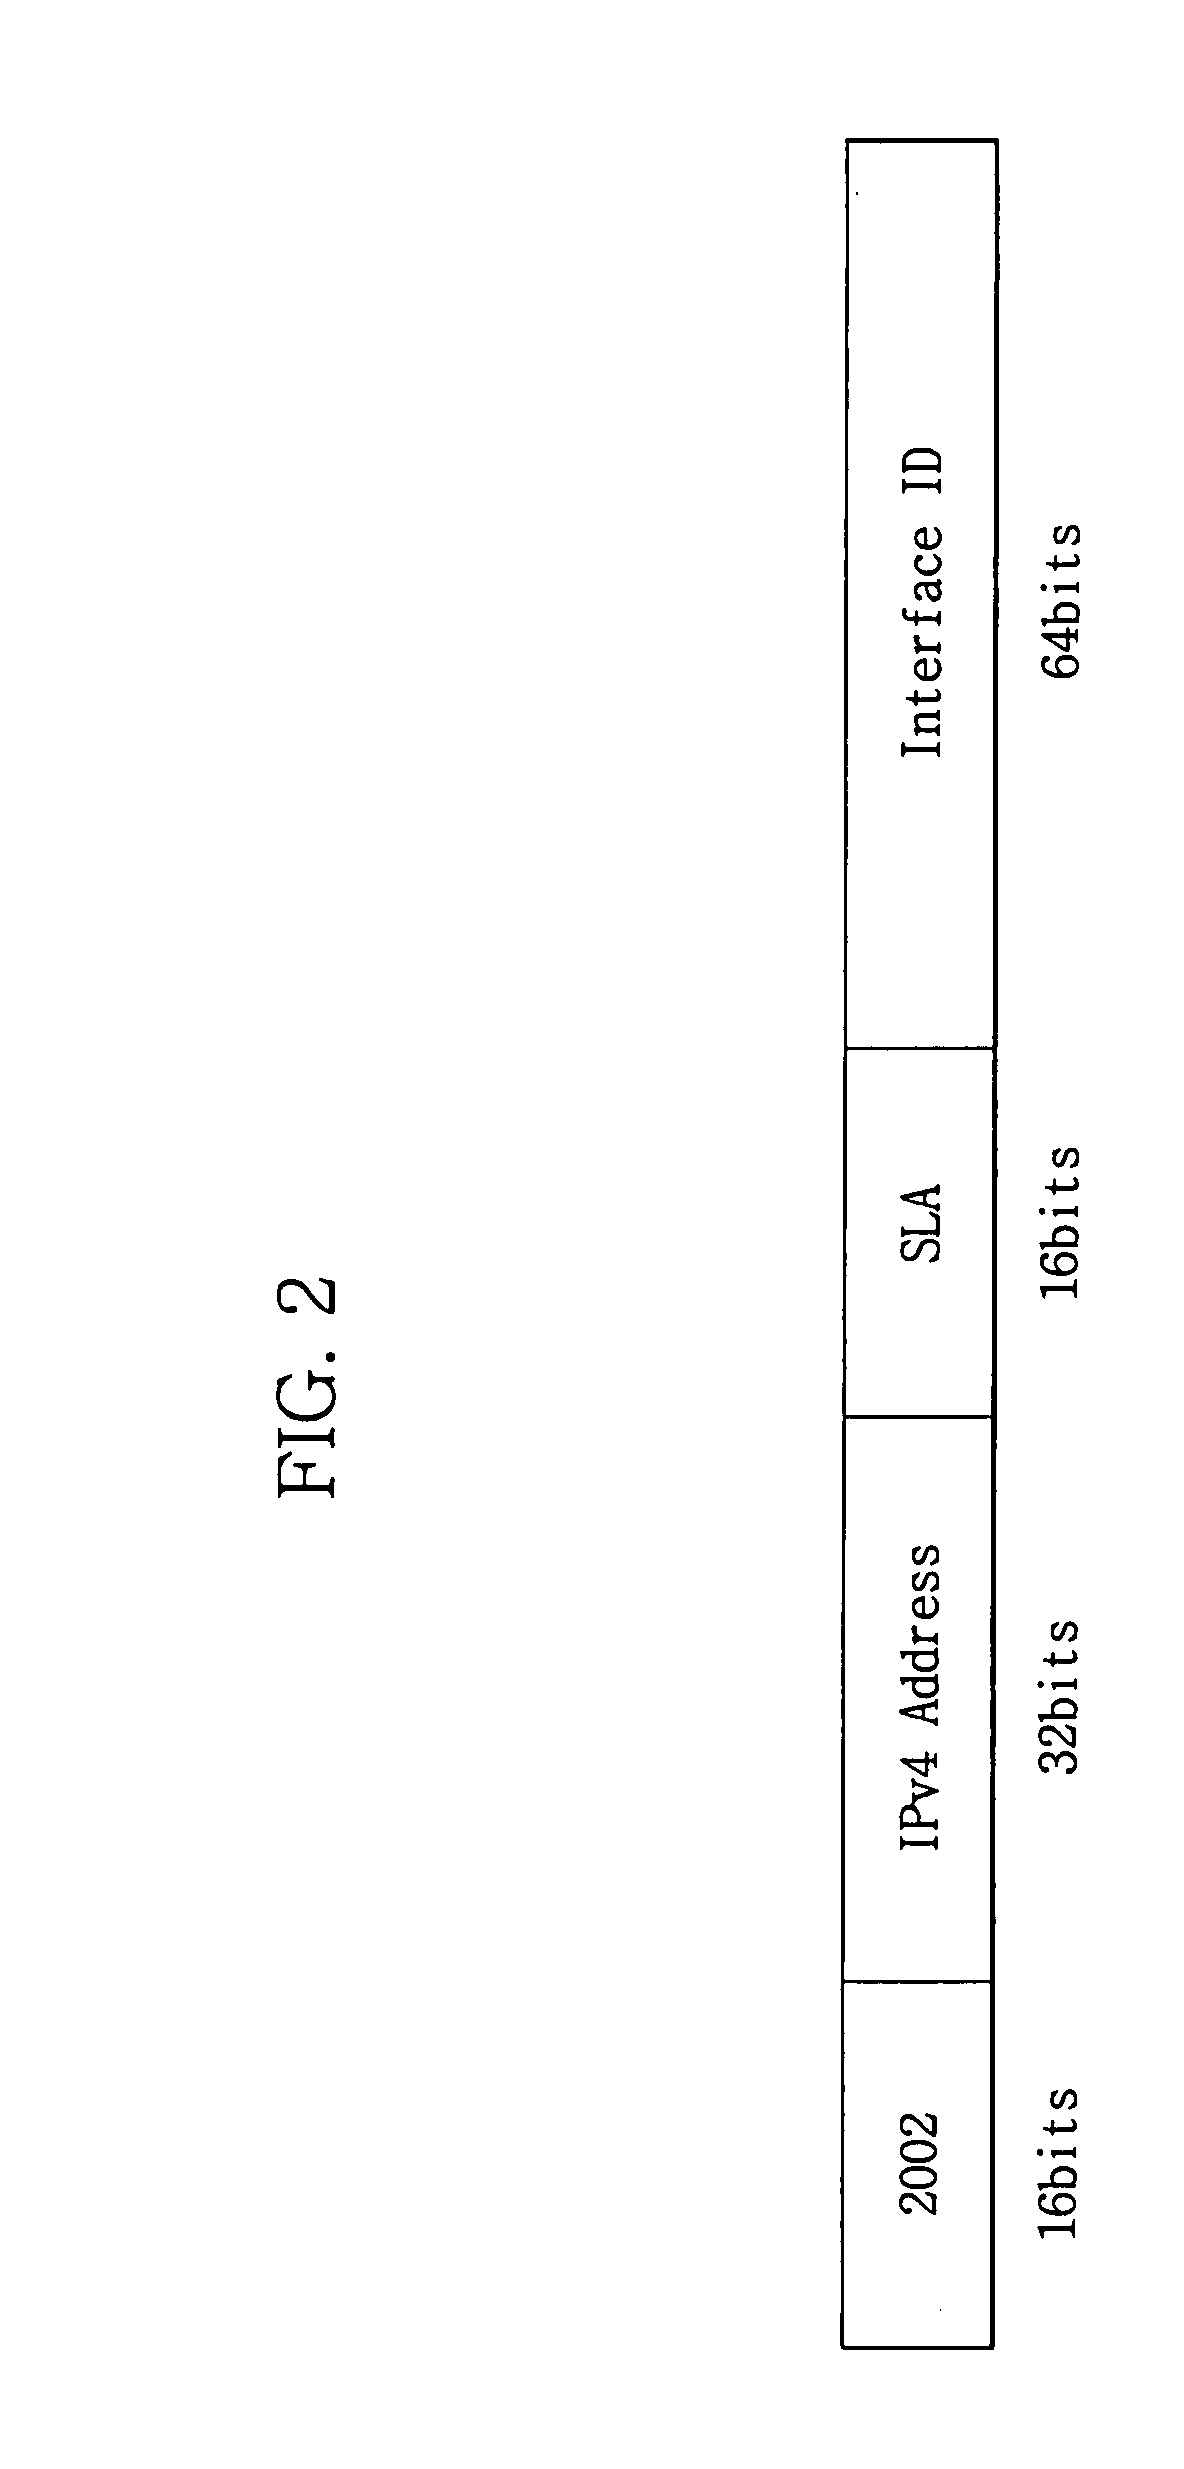 Method and system for automatic tunneling using network address translation